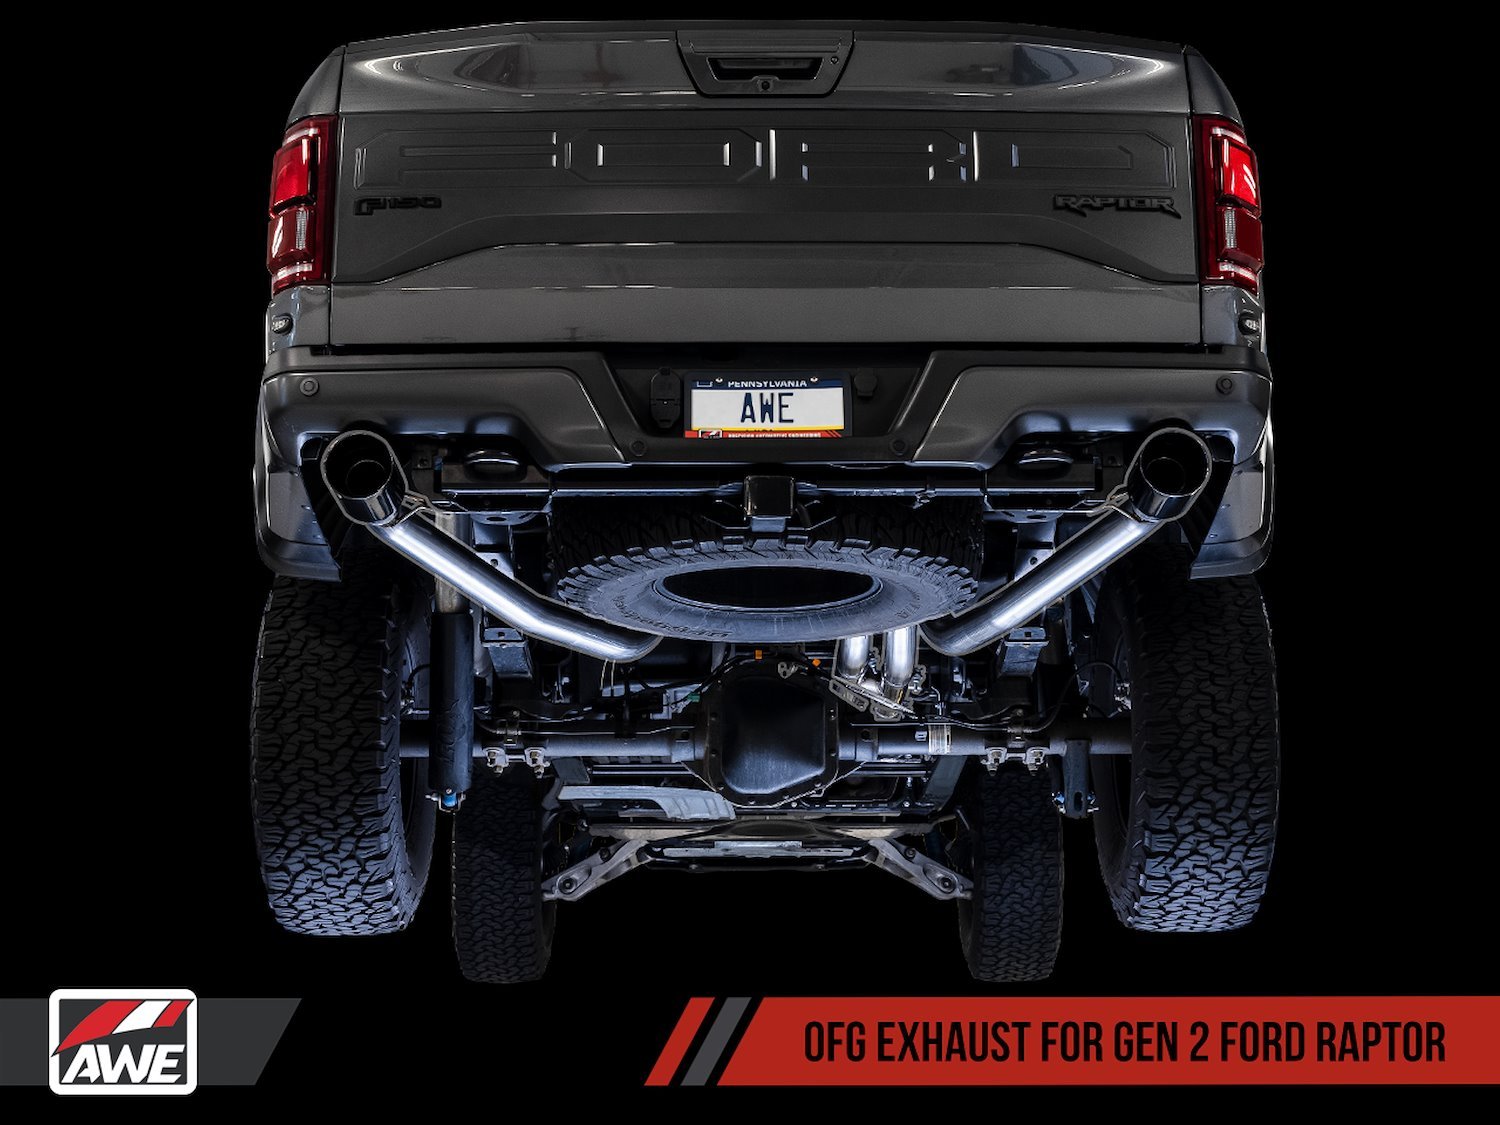 AWE 0FG Exhaust for Gen 2 Ford Raptor (Resonated Performance Cat-back) - Diamond Black 5" Tips